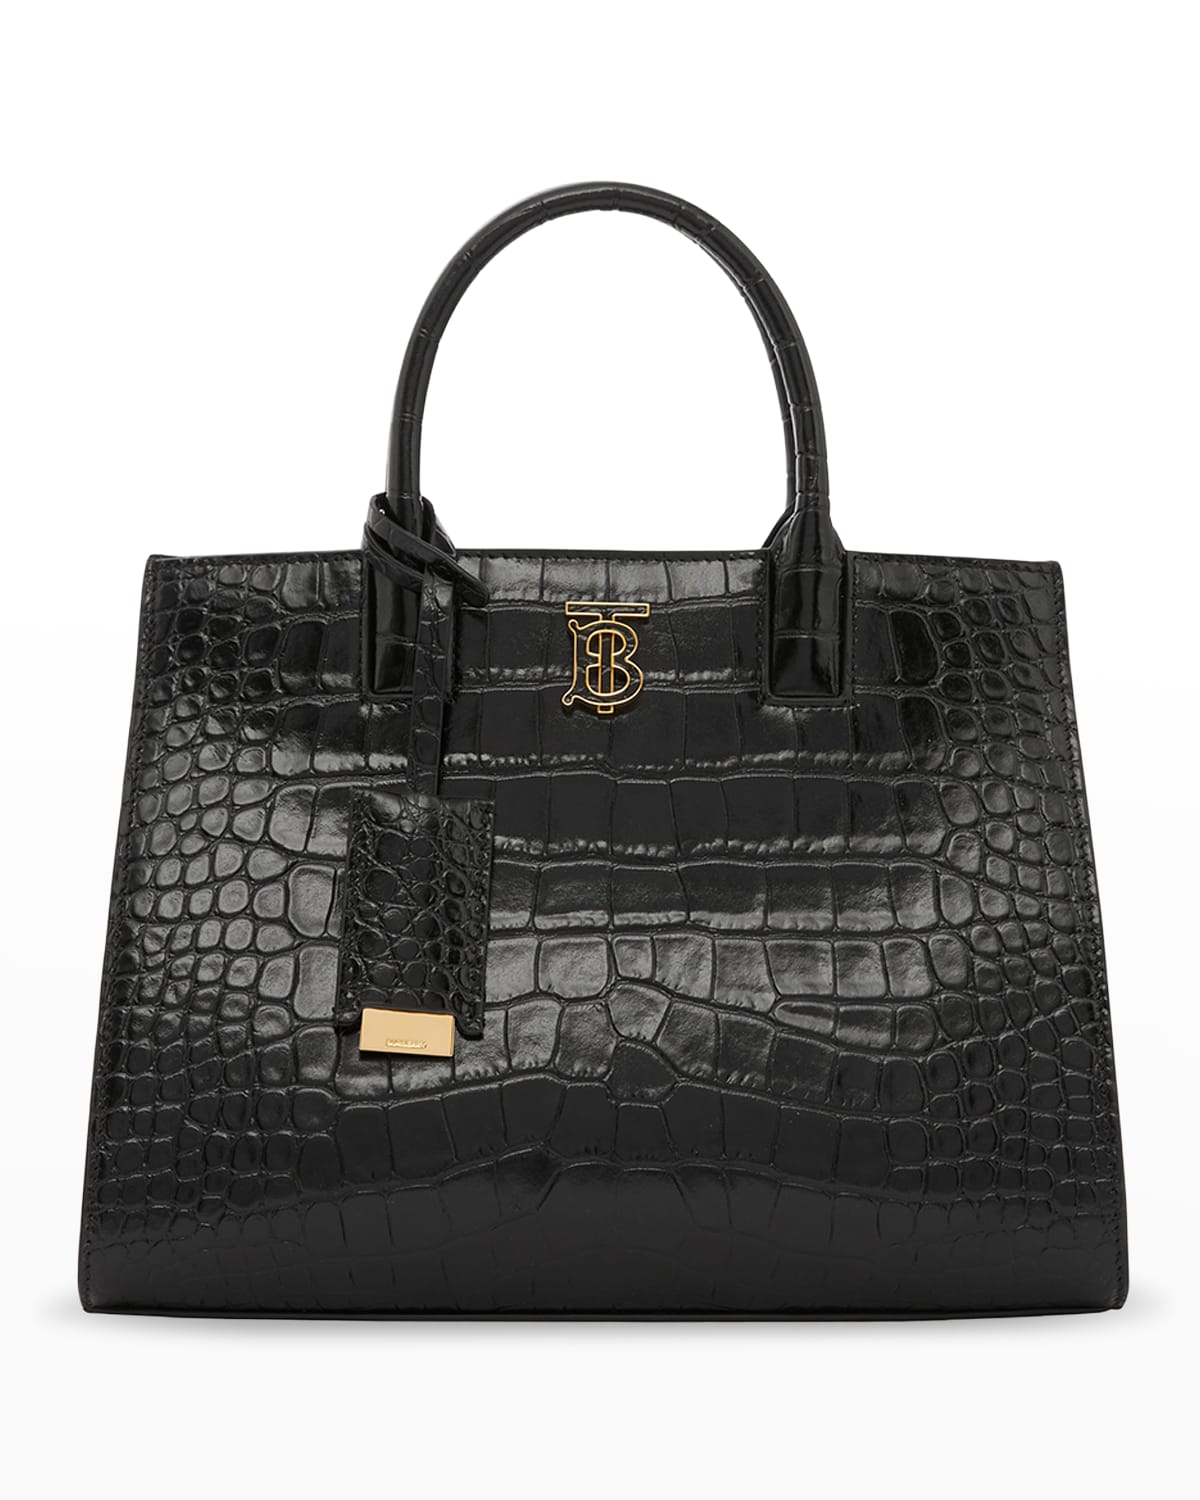 Burberry Frances Croc-Embossed Leather Top-Handle Bag